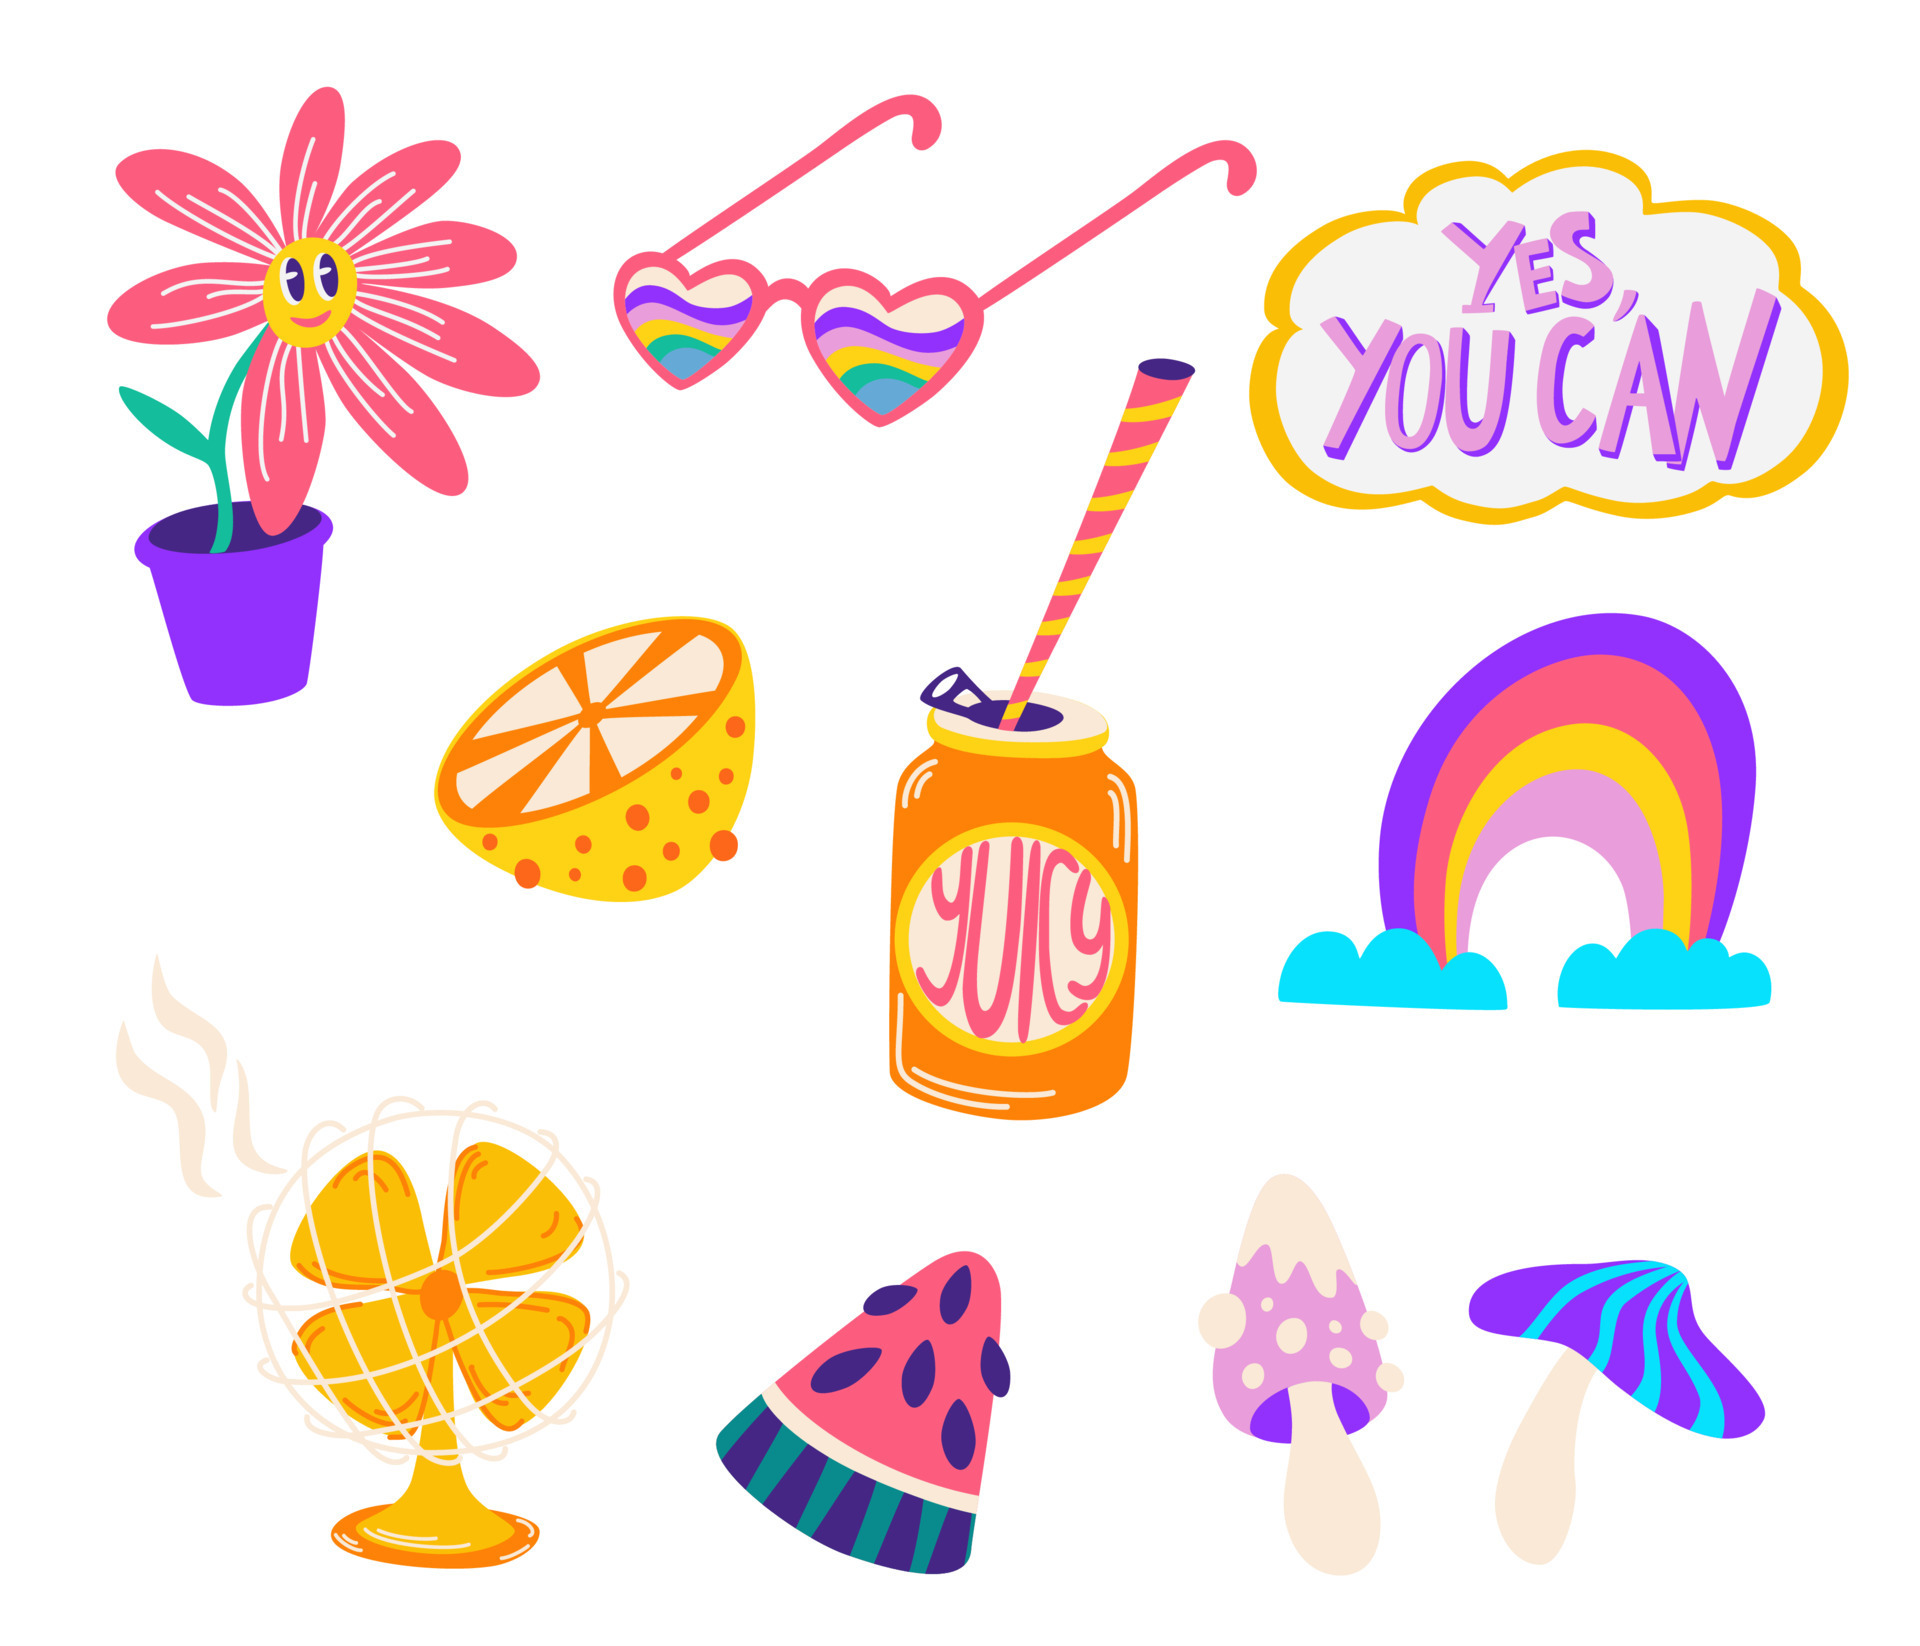 90s sticker Vectors & Illustrations for Free Download